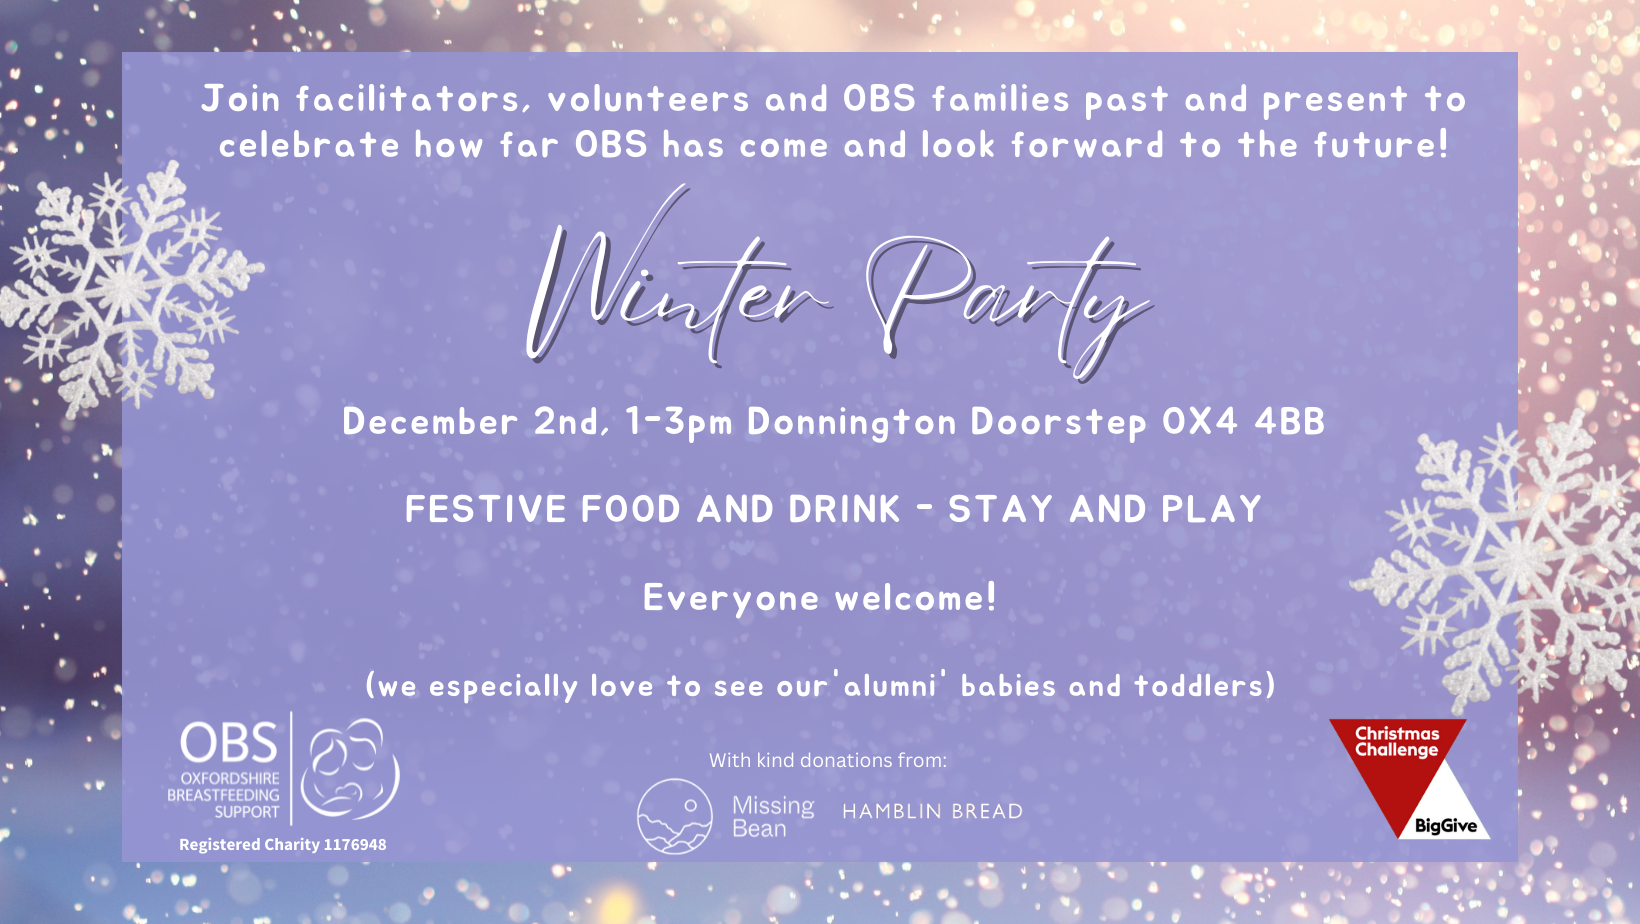 Text on a wintry purple background: Join facilitators, volunteers and OBS families past and present to celebrate how far OBS has come and look forward to the future! Winter Party, December 2nd, 1-3pm, Donnington Doorstep, OX4 4BB. Festive food and drink, stay and play